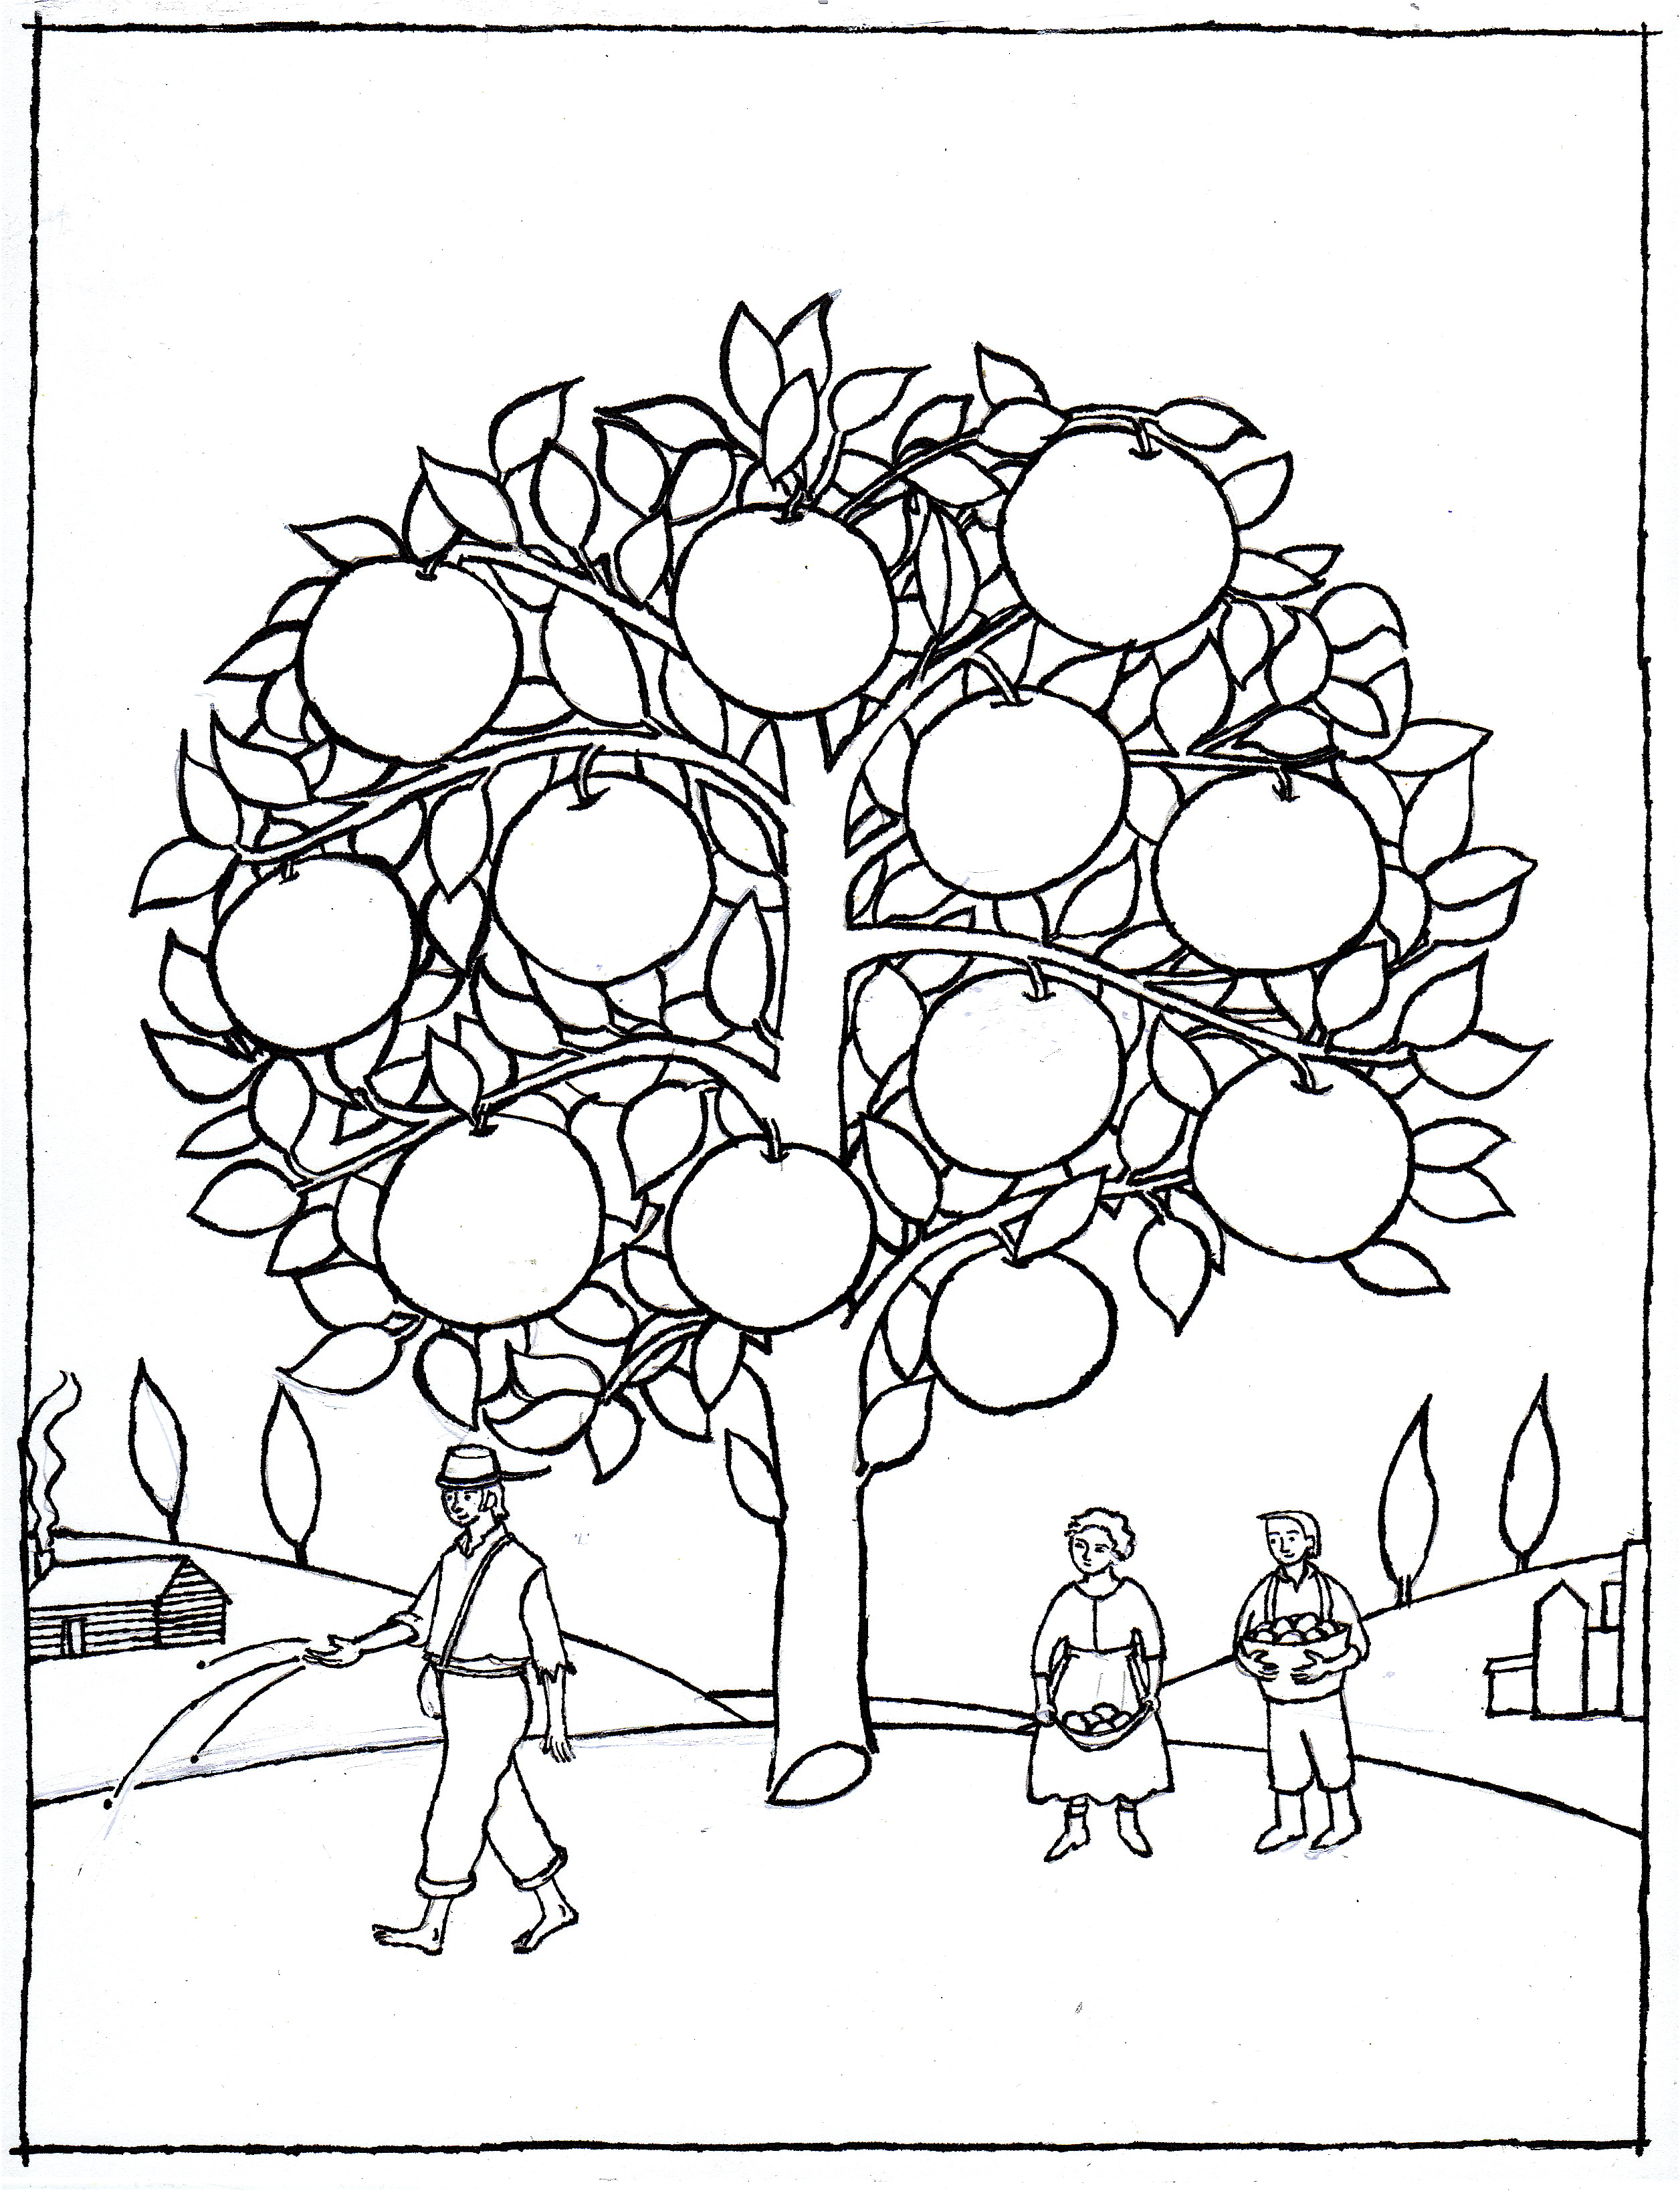 Johnny appleseed coloring page lynne rae perkins